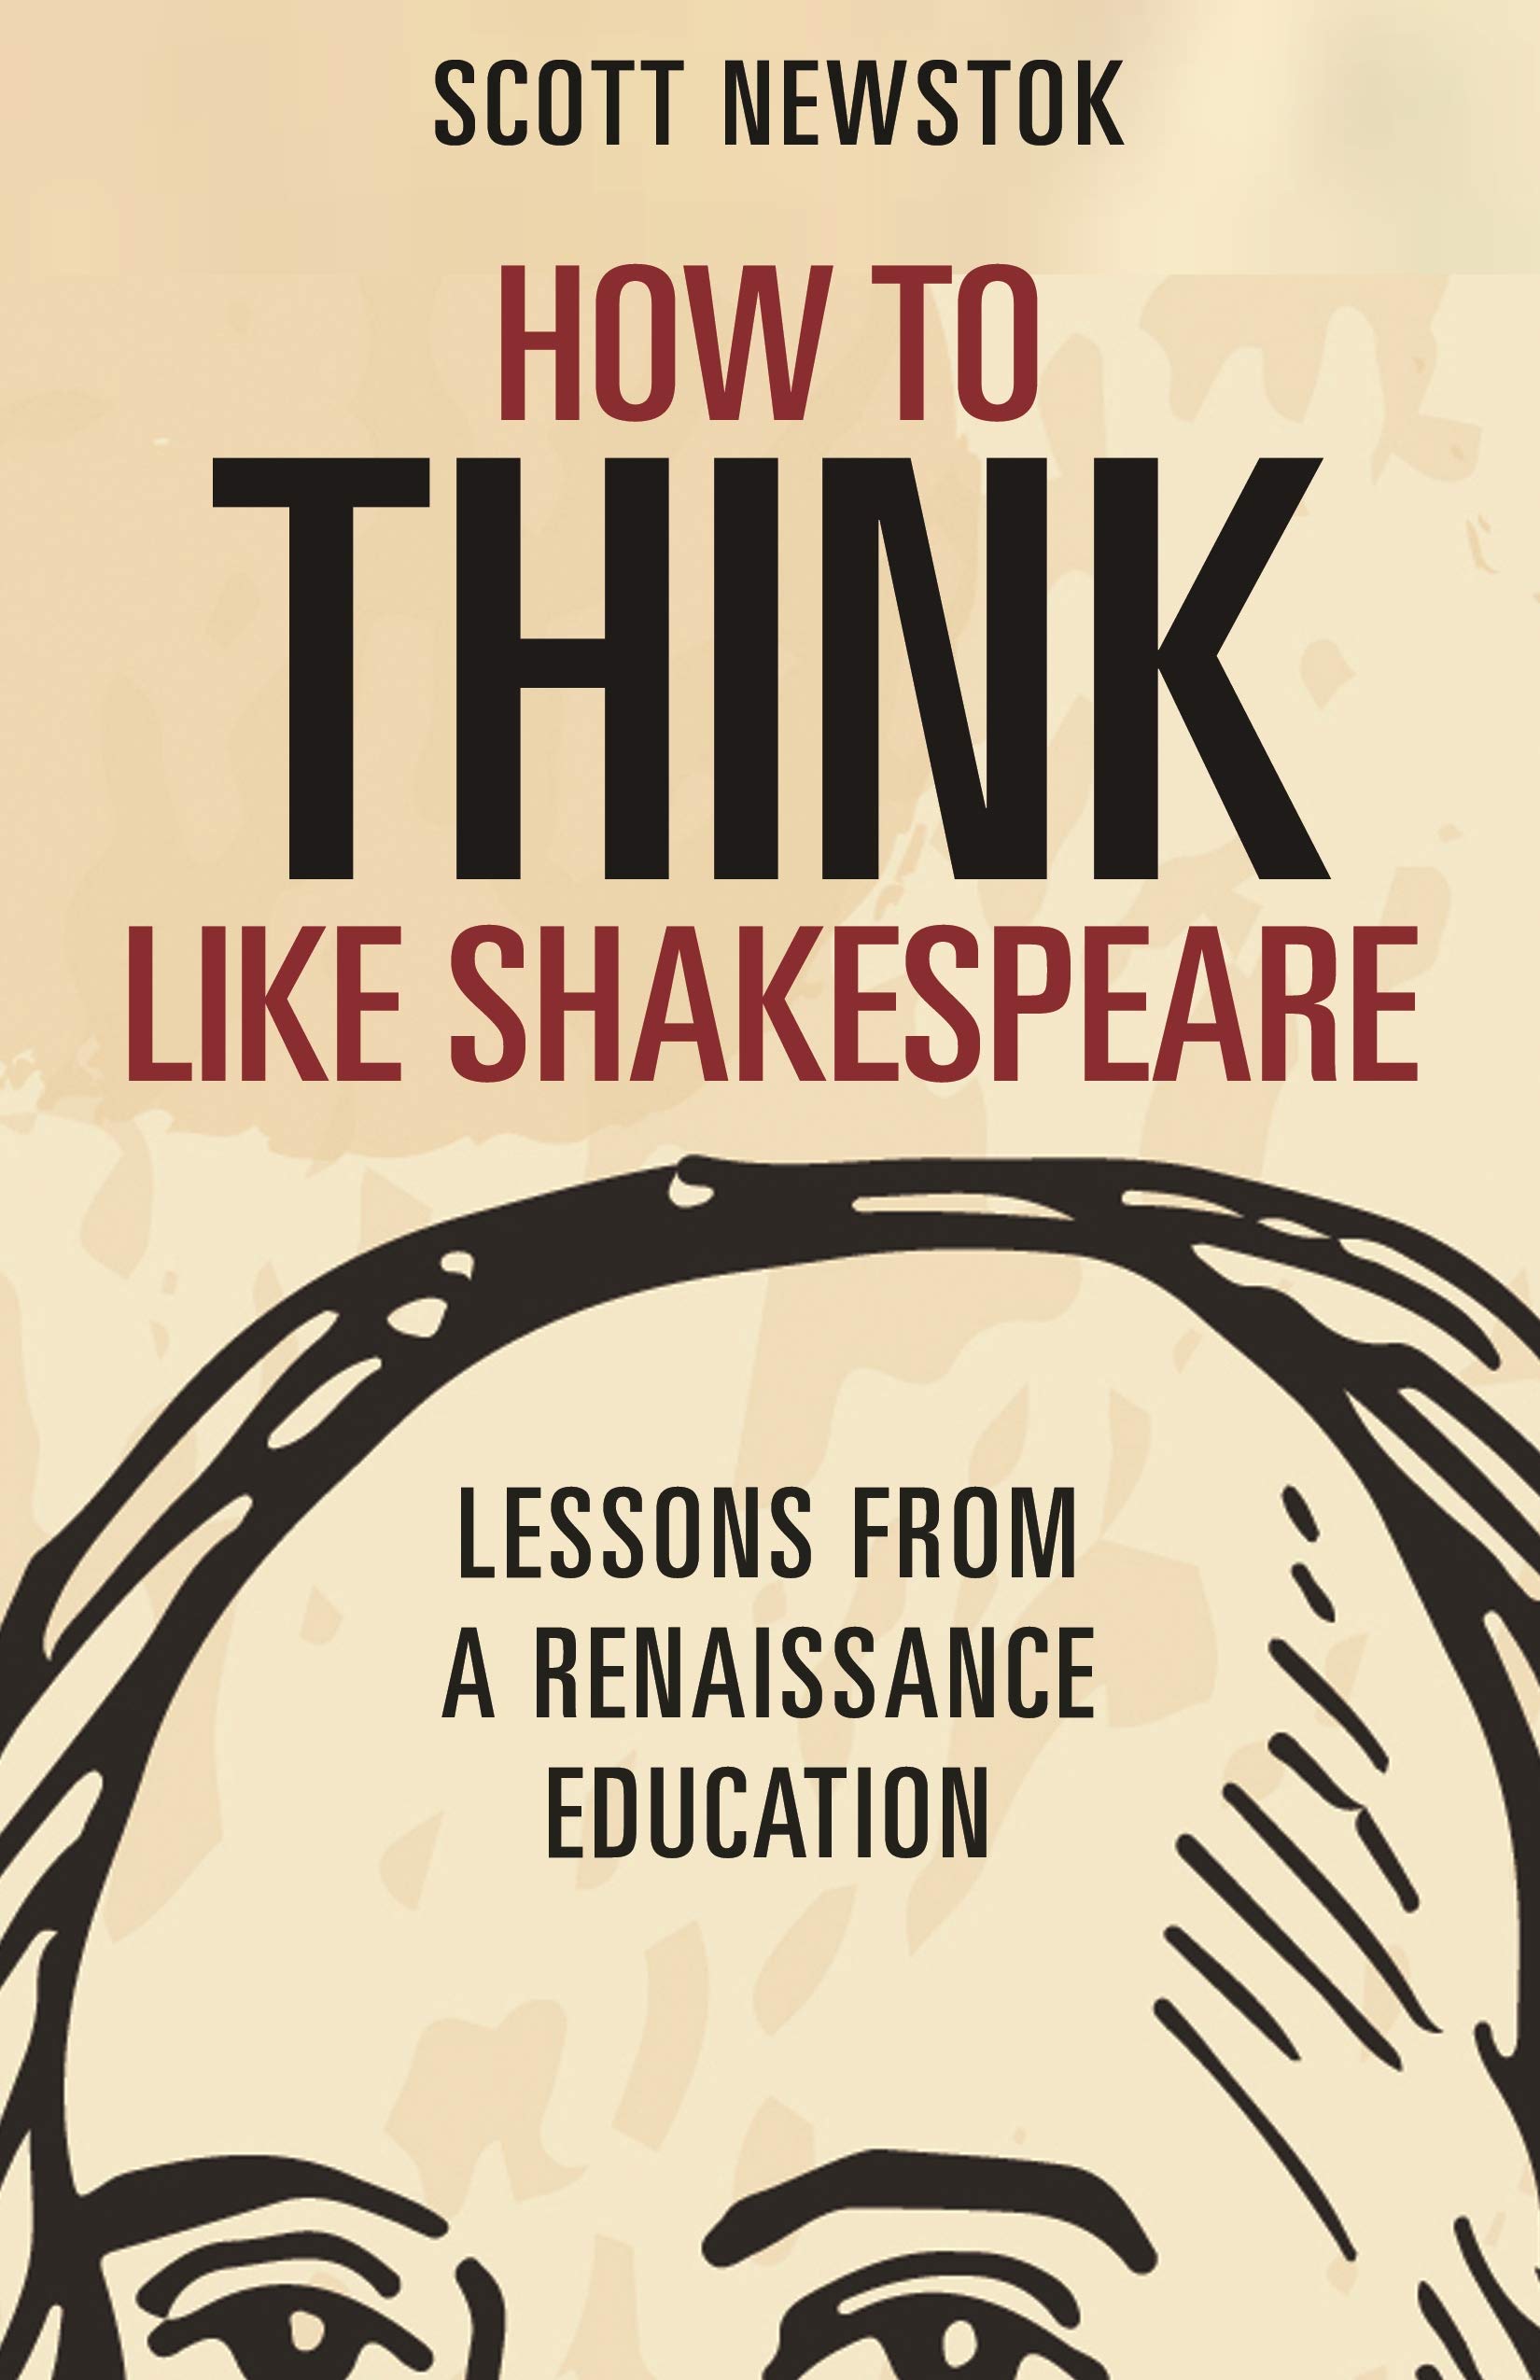 How-to-Think-Like-Shakespeare